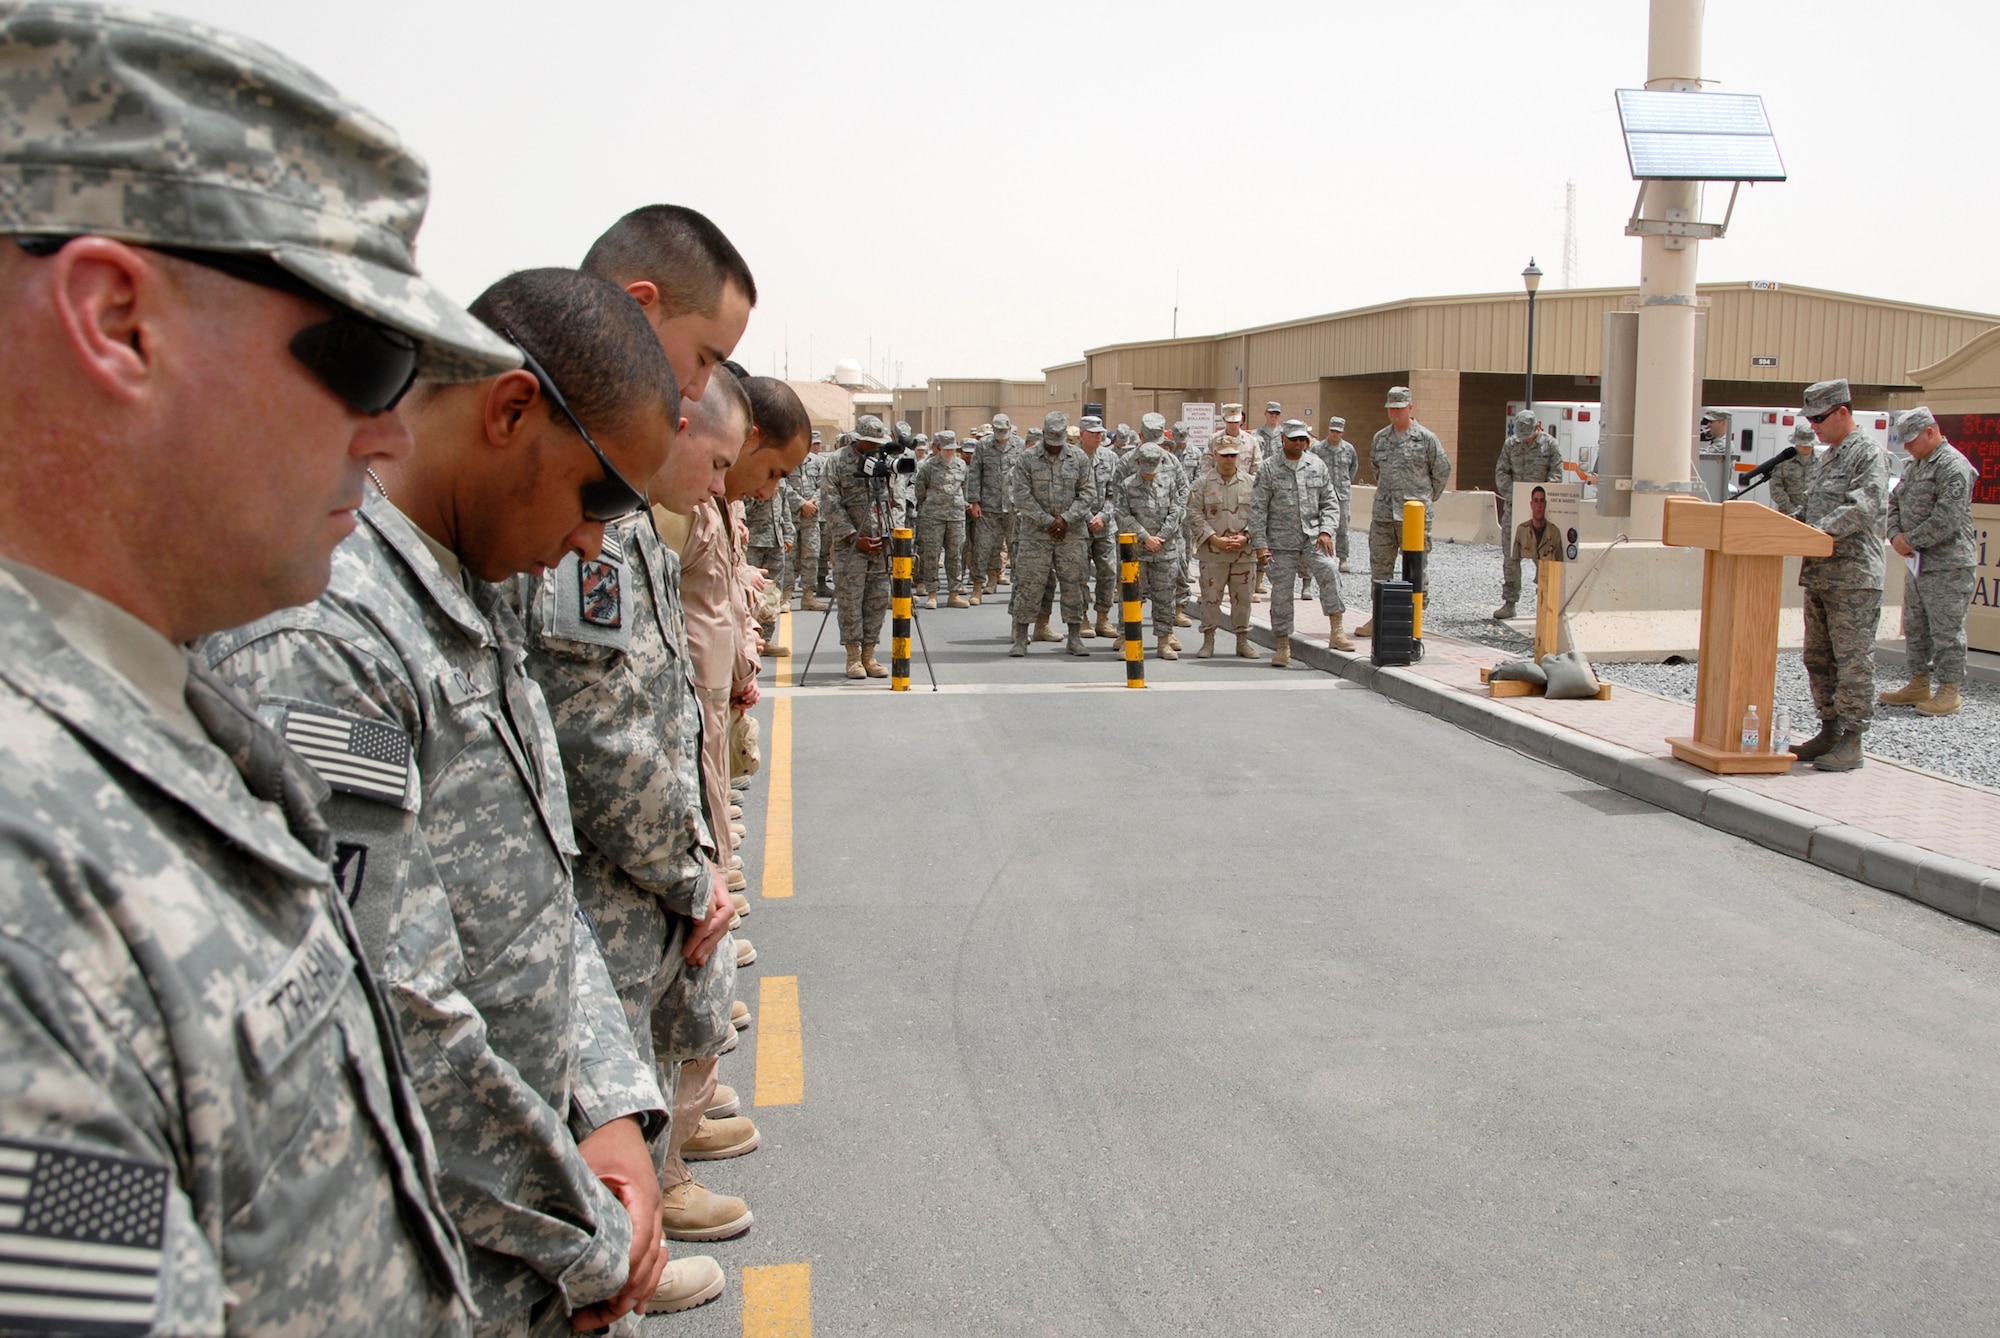 SOUTHWEST ASIA -- Airmen from the 586th Expeditionary Logistics Readiness Squadron, 70th and 424th Medium Truck Detachments, and Soldiers from the Army's 1st Theater Support Command, 640th Sustainment Brigade, 1144th Transportation Battalion, along with other Airmen from the 386th Air Expeditionary Wing, bow their heads during the invocation from Lt. Col. (Chaplain) Paul Sherouse, (right), during a street dedication ceremony June 10, 2008, on an air base in the Persian Gulf Region. The ceremony is a tribute to Airman 1st Class Eric Barnes and his family with the naming of Barnes Road. Airman Barnes, 20, of Lorain, Ohio, died June 10, 2007 as a result of an improved explosive device attack on an Air Force convoy about 100 miles south of Baghdad, Iraq. He was deployed from the 90th Logistics Readiness Squadron at F.E. Warren Air Force Base, Wyo.  (U.S. Air Force photo/ Staff Sgt. Patrick Dixon) 